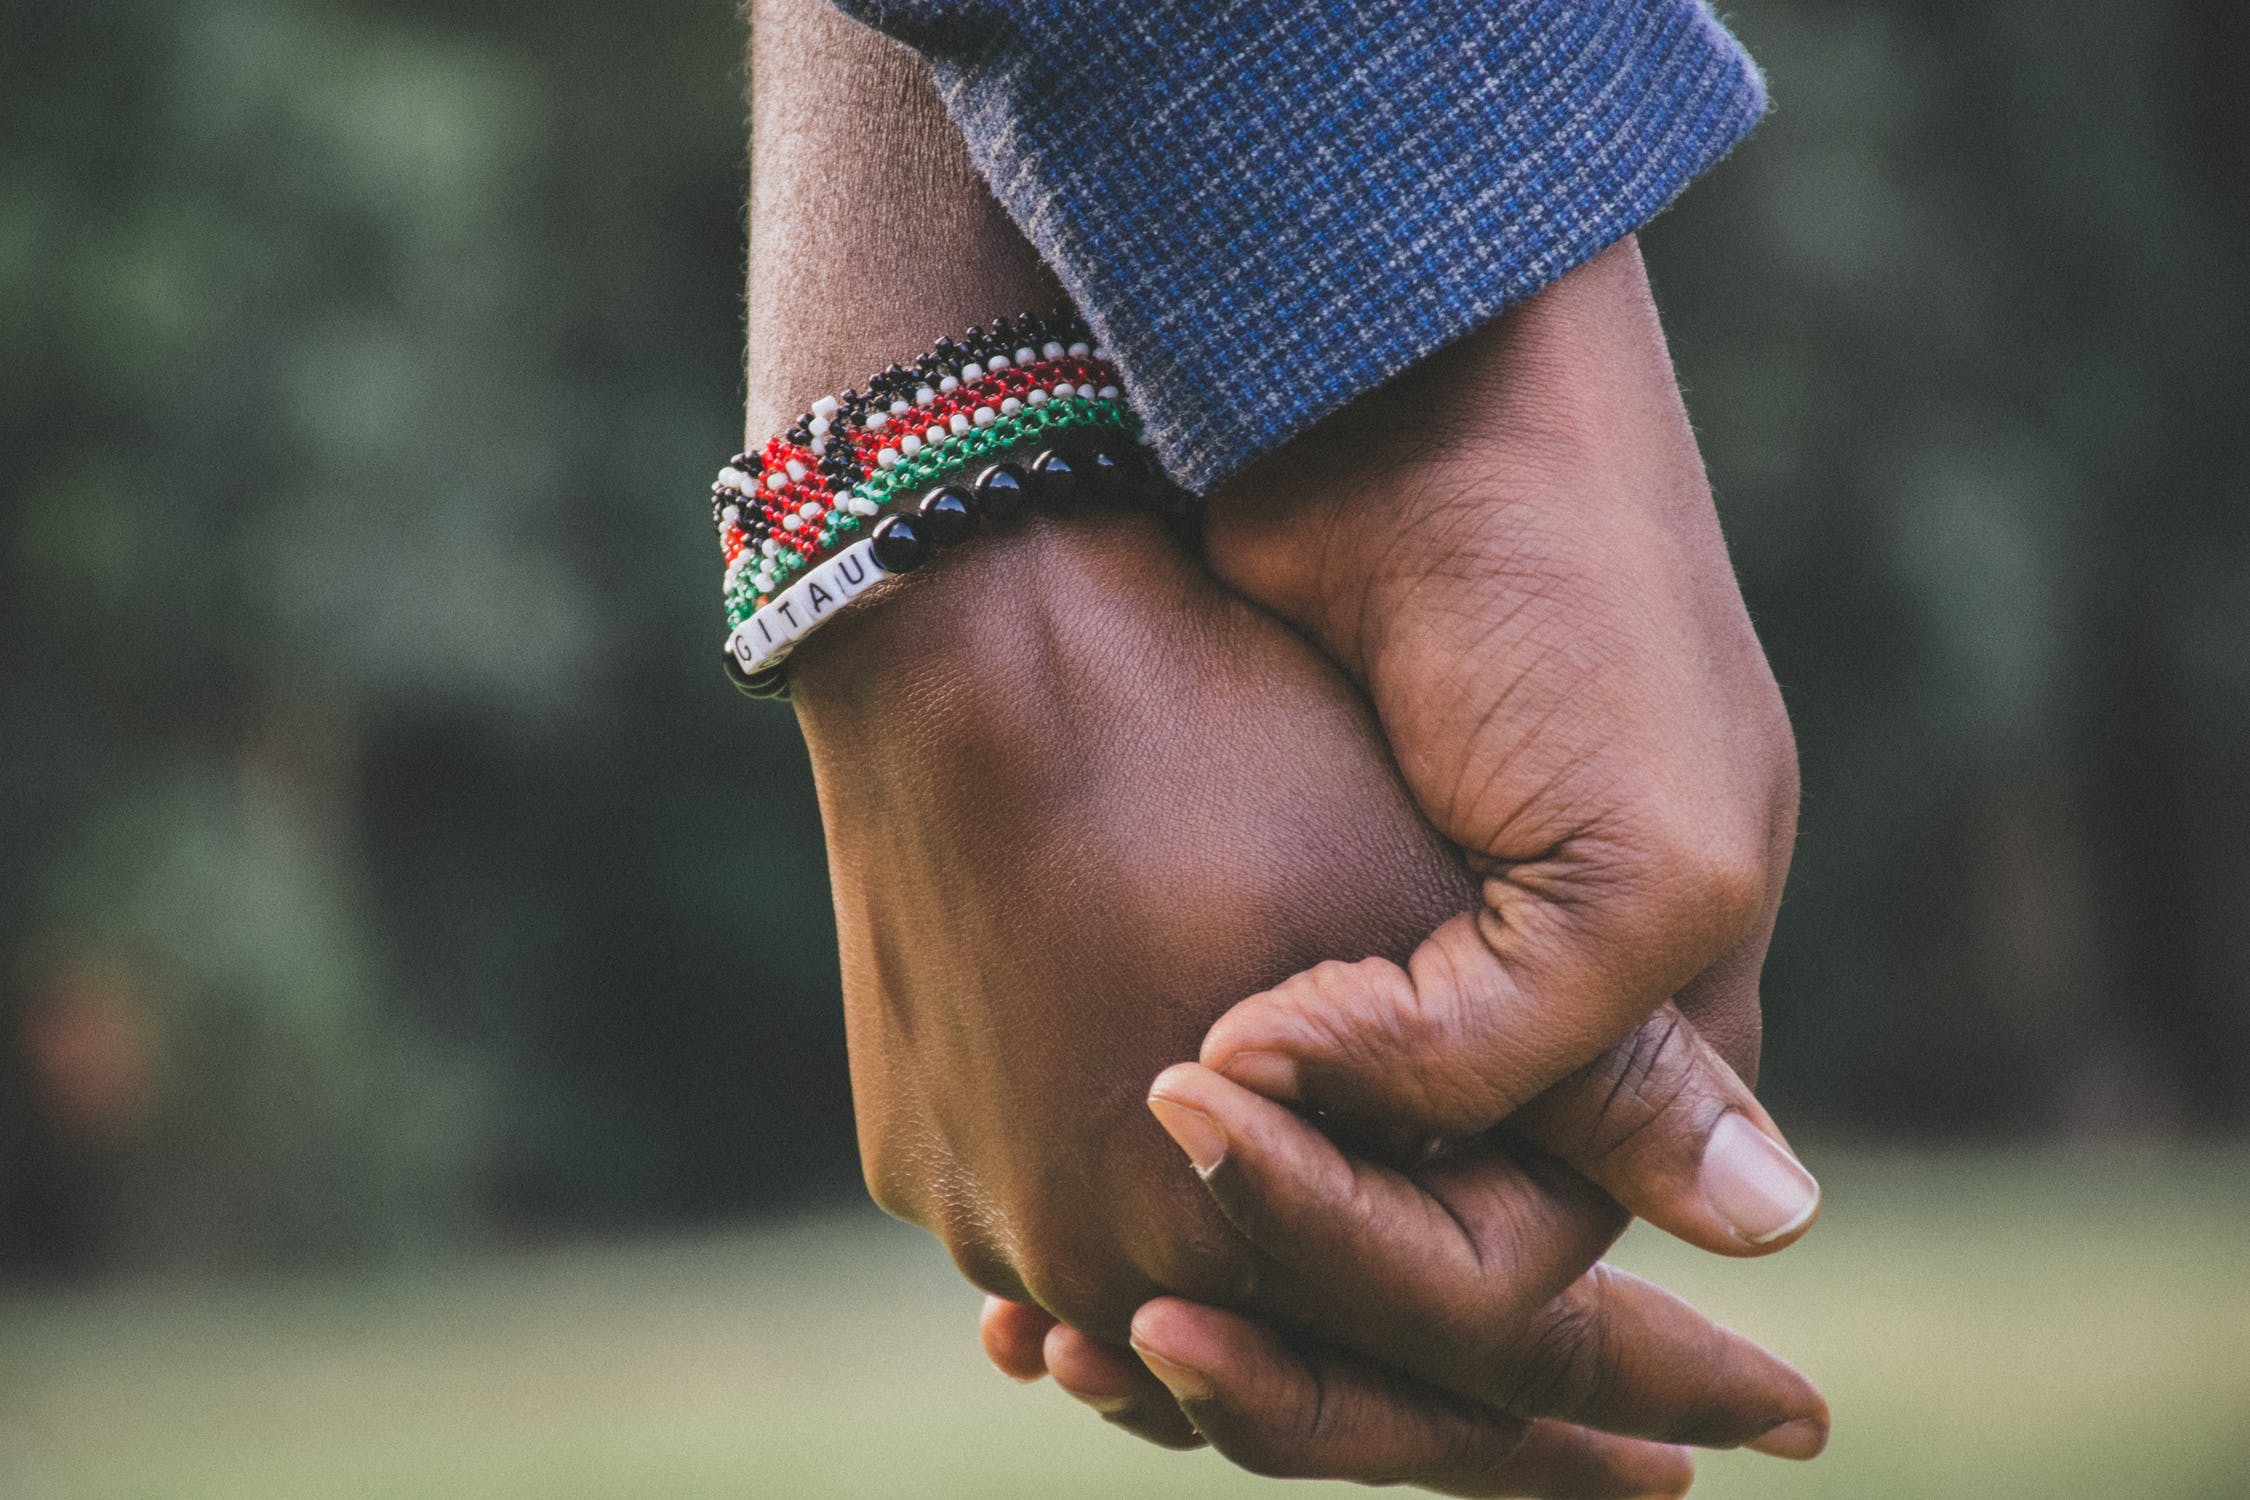 Giving together: Factors to consider when representing couples